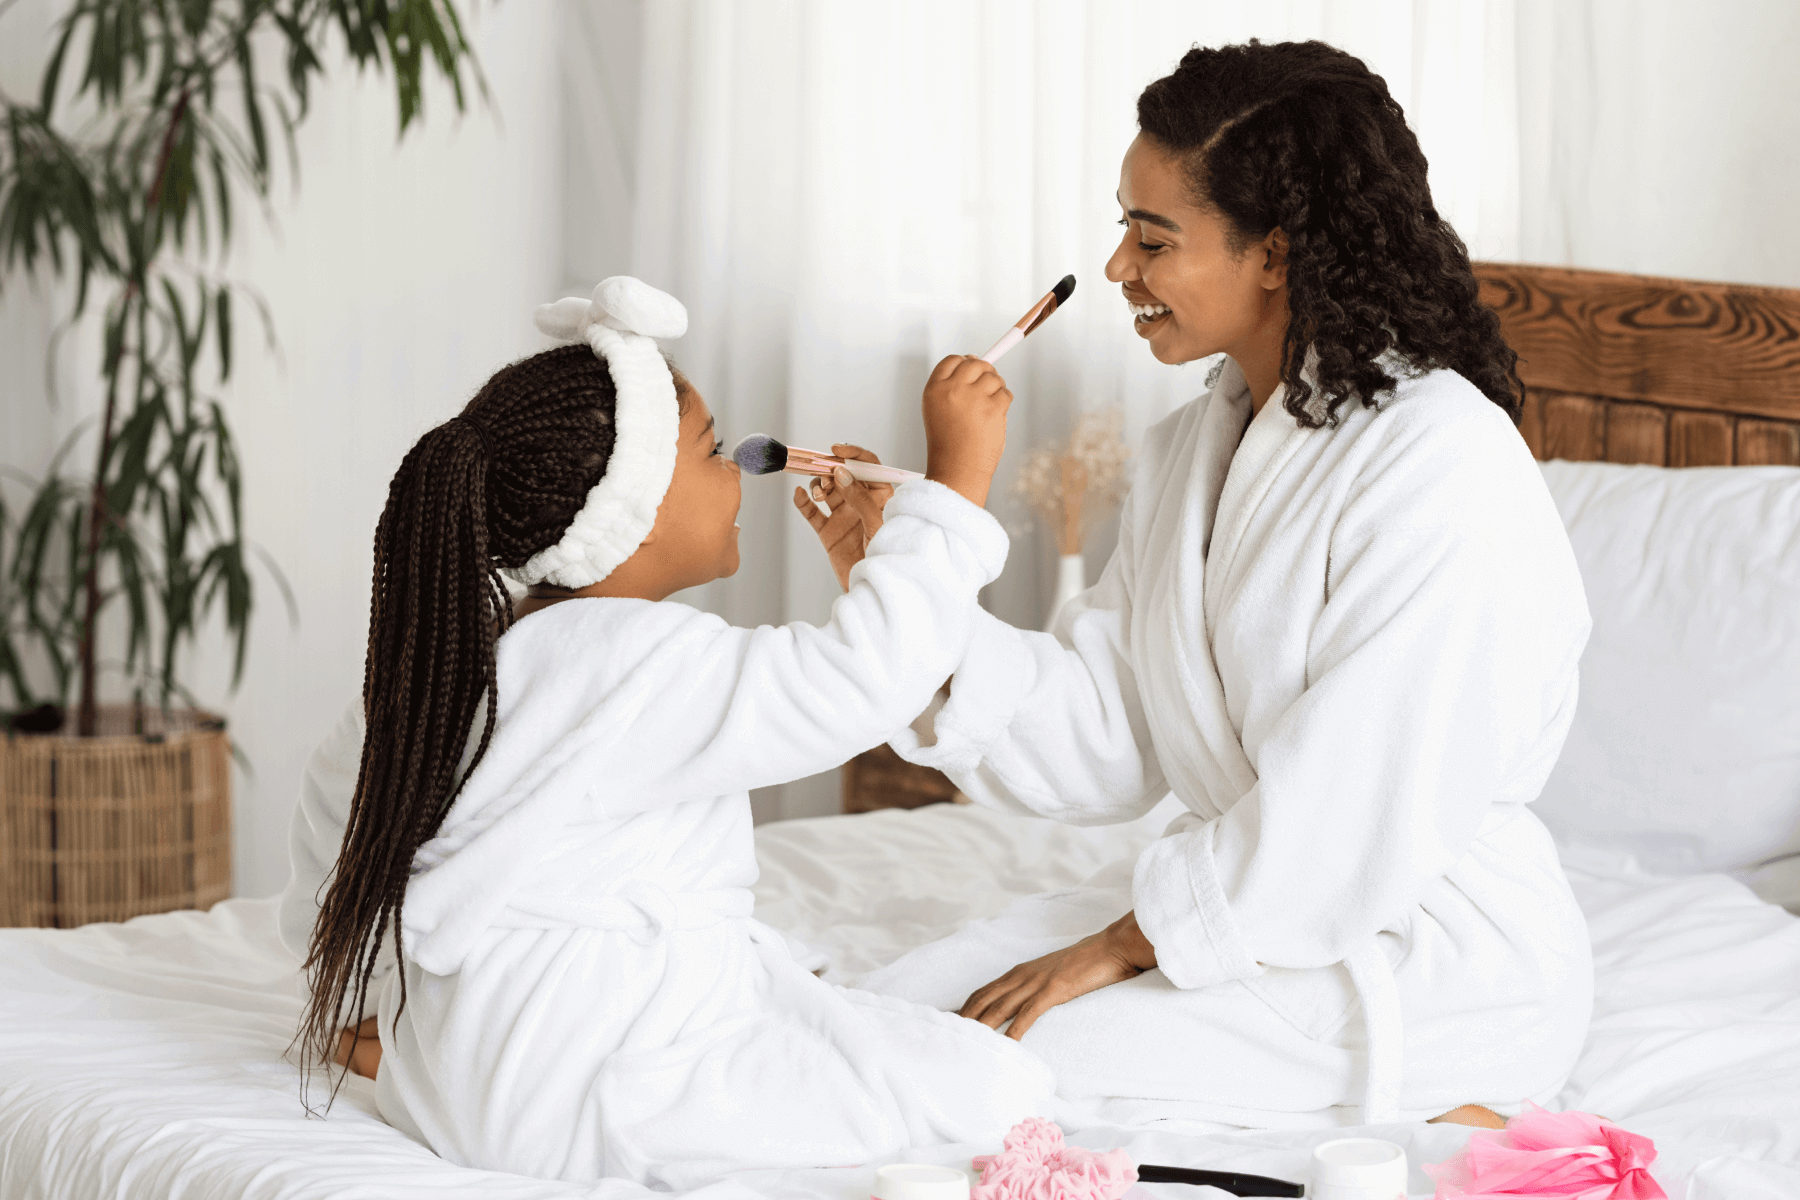 A mother and daughter in white robes on a bed play with makeup brushes.